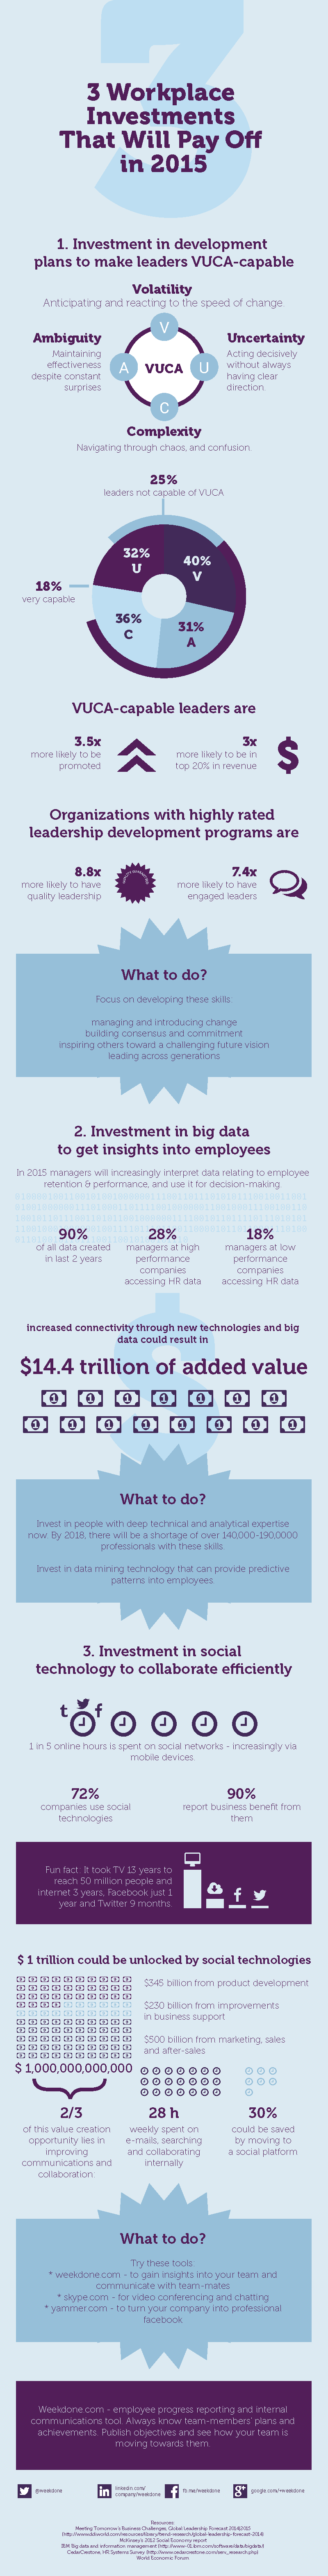 investments in workforce infographic weekdone